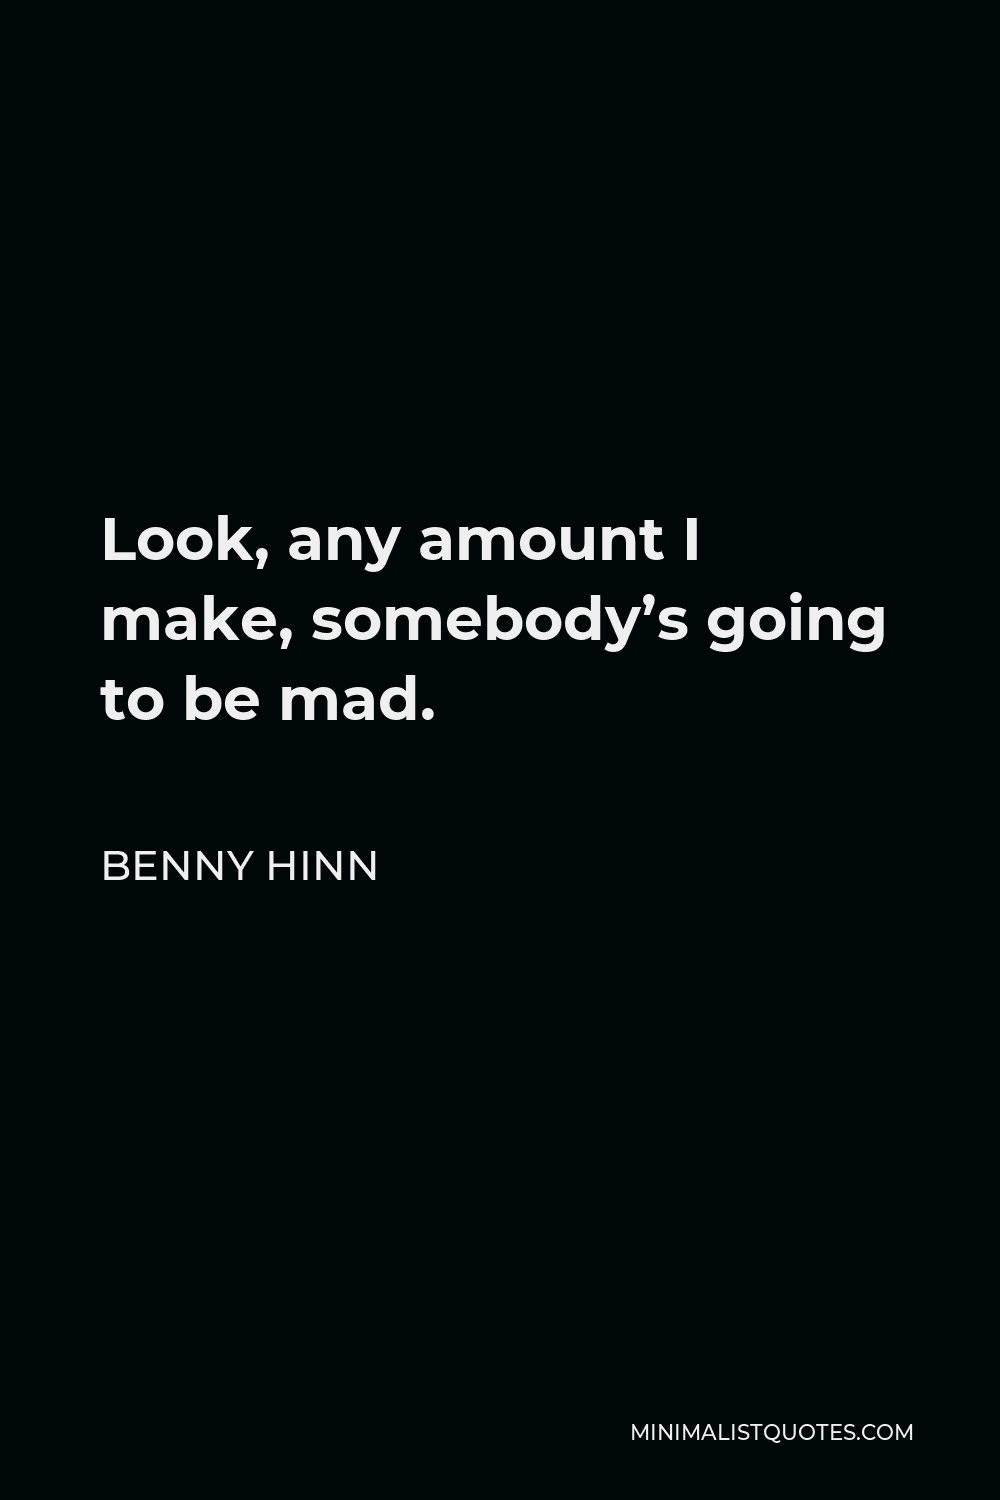 Benny Hinn Quote - Look, any amount I make, somebody’s going to be mad.